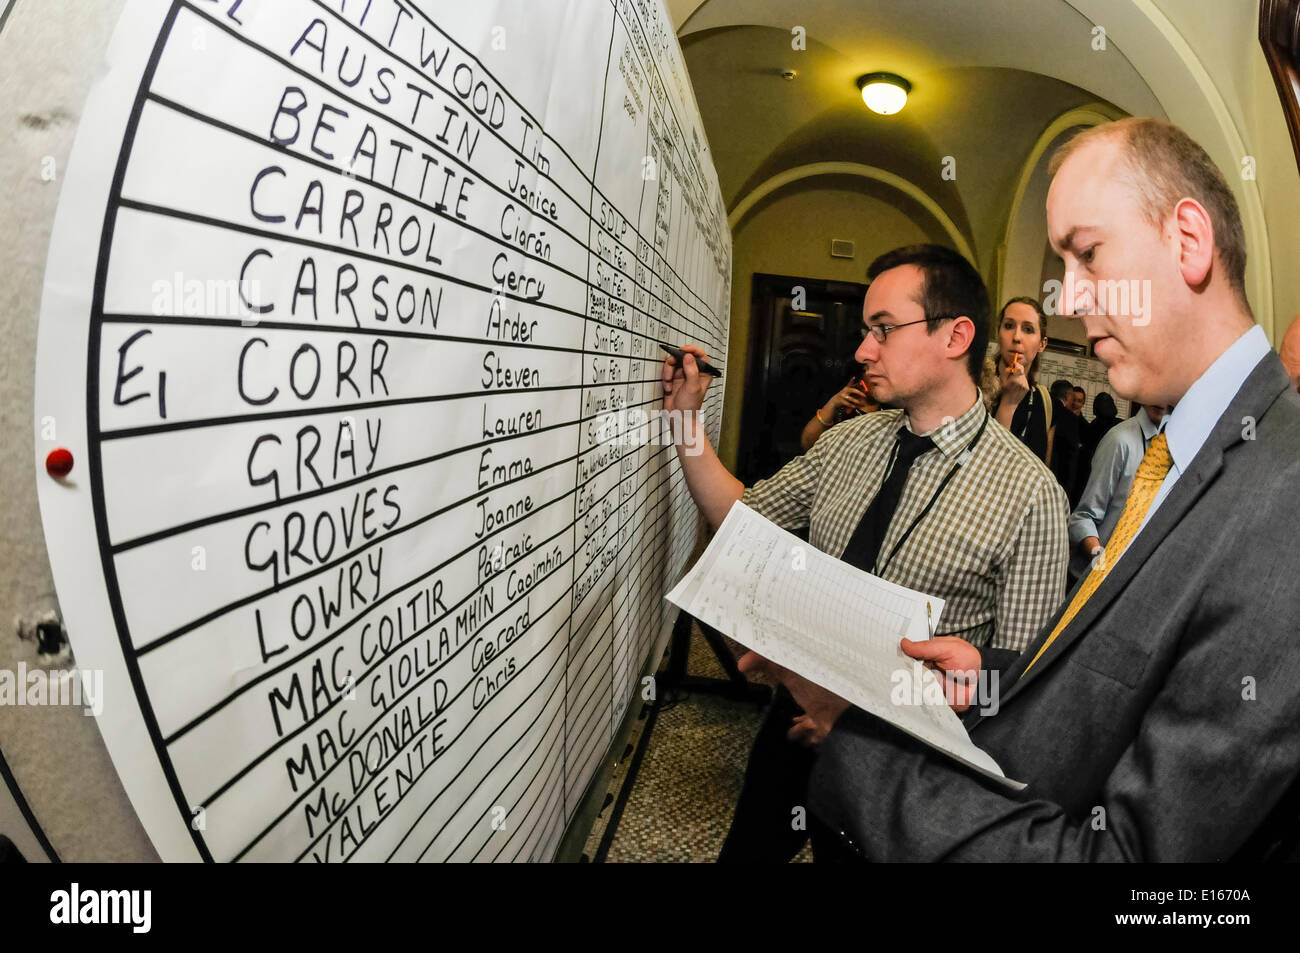 Belfast, Northern Ireland. 23 May 2014 - An election agent writes the results on a large board during the Local Council Elections in Northern Ireland Credit:  Stephen Barnes/Alamy Live News Stock Photo